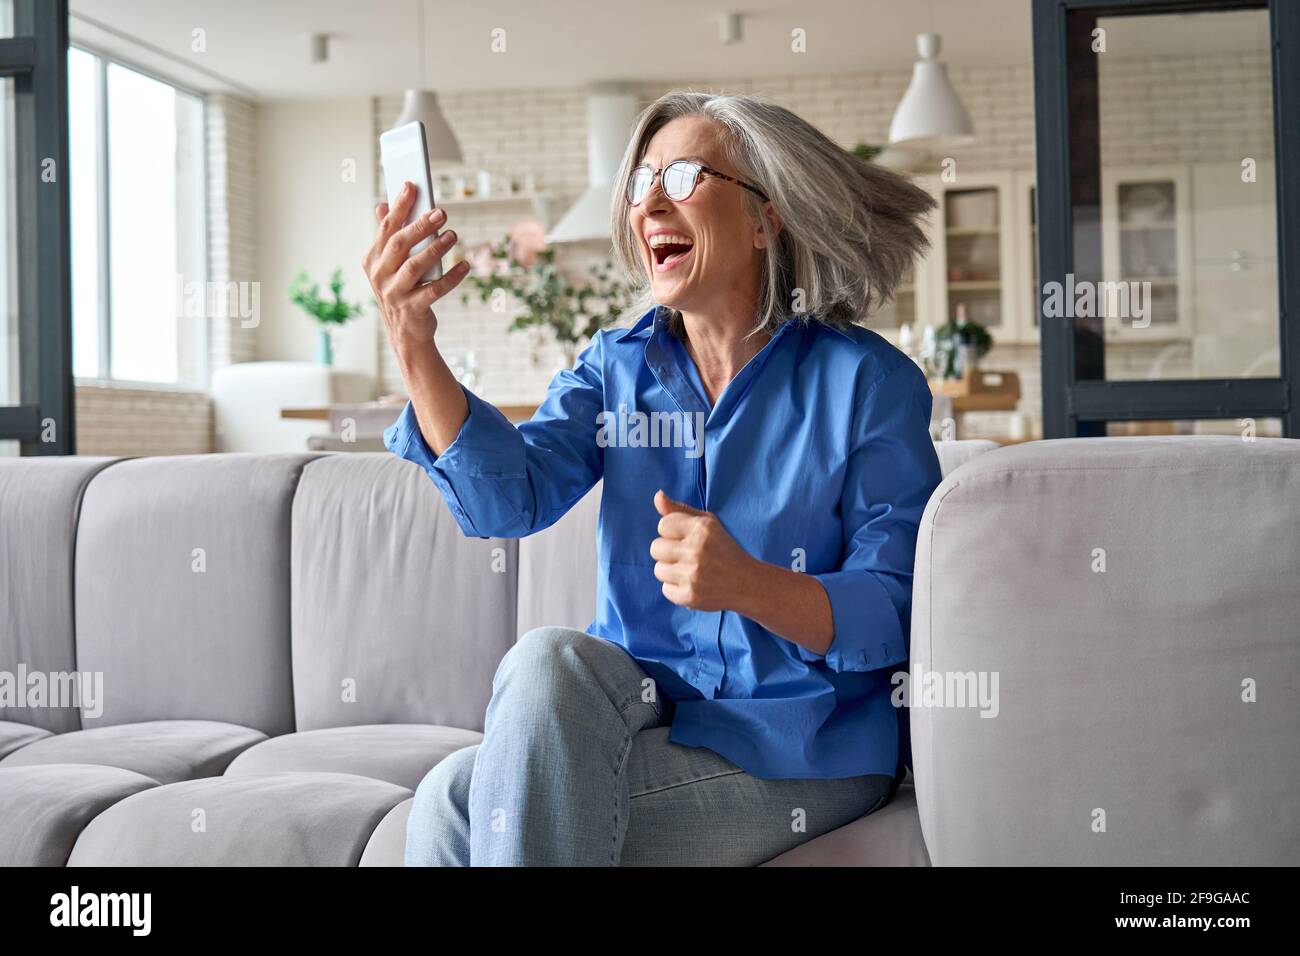 Surprised exited mature woman 60s aged at home with cellphone. Stock Photo